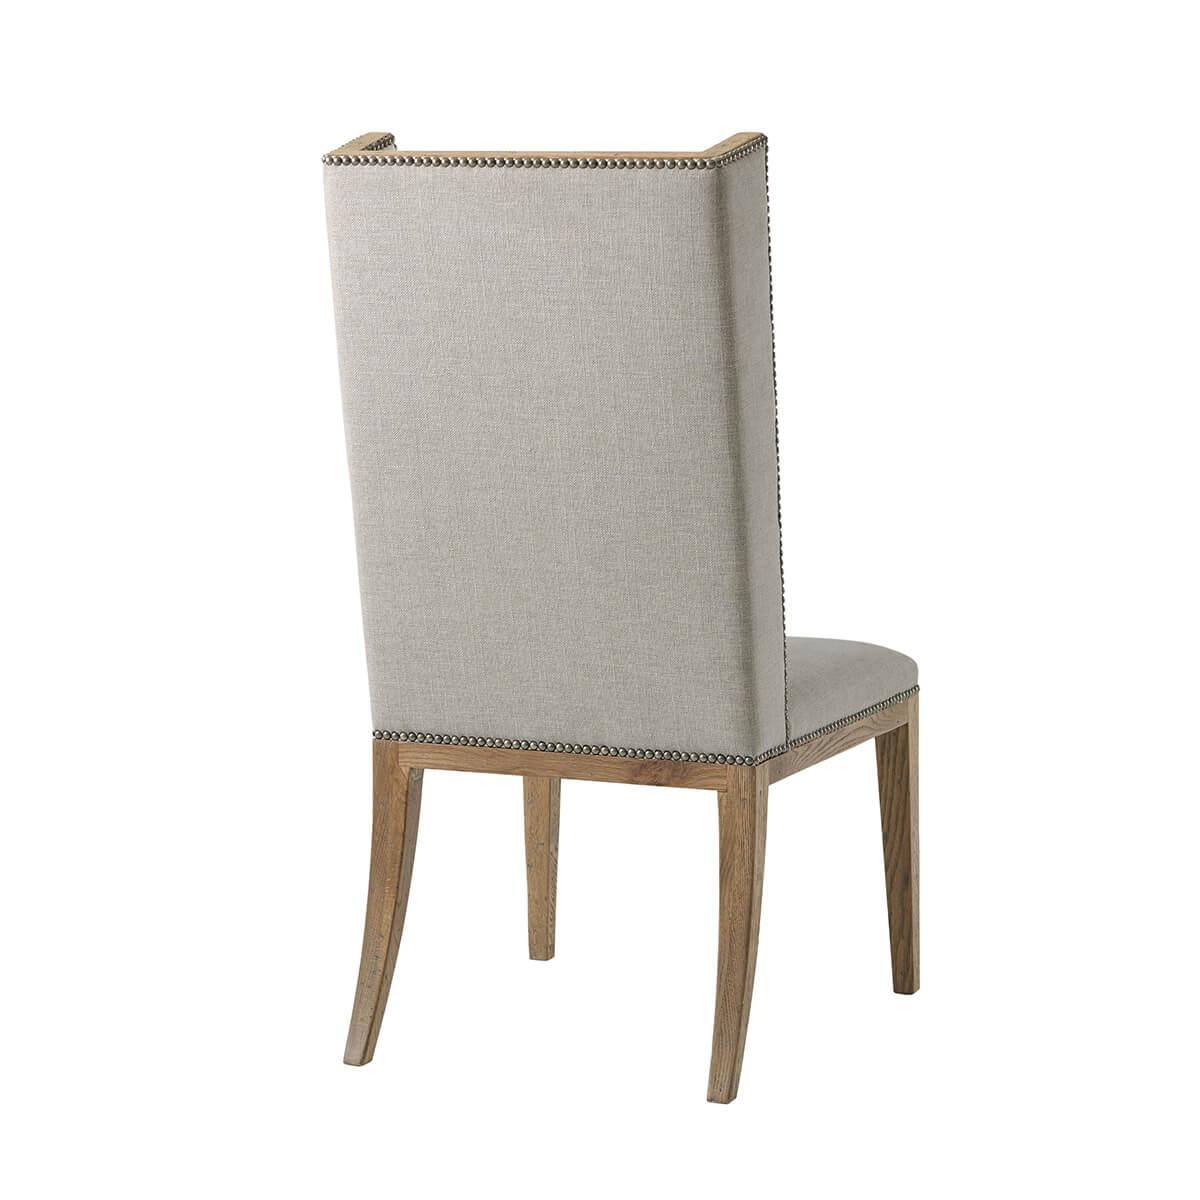 Upholstered Dining Chair in a light echo oak finish frame. The slender winged back and seat are upholstered in performance fabric. Raised on square tapered legs.

Dimensions: 21.5